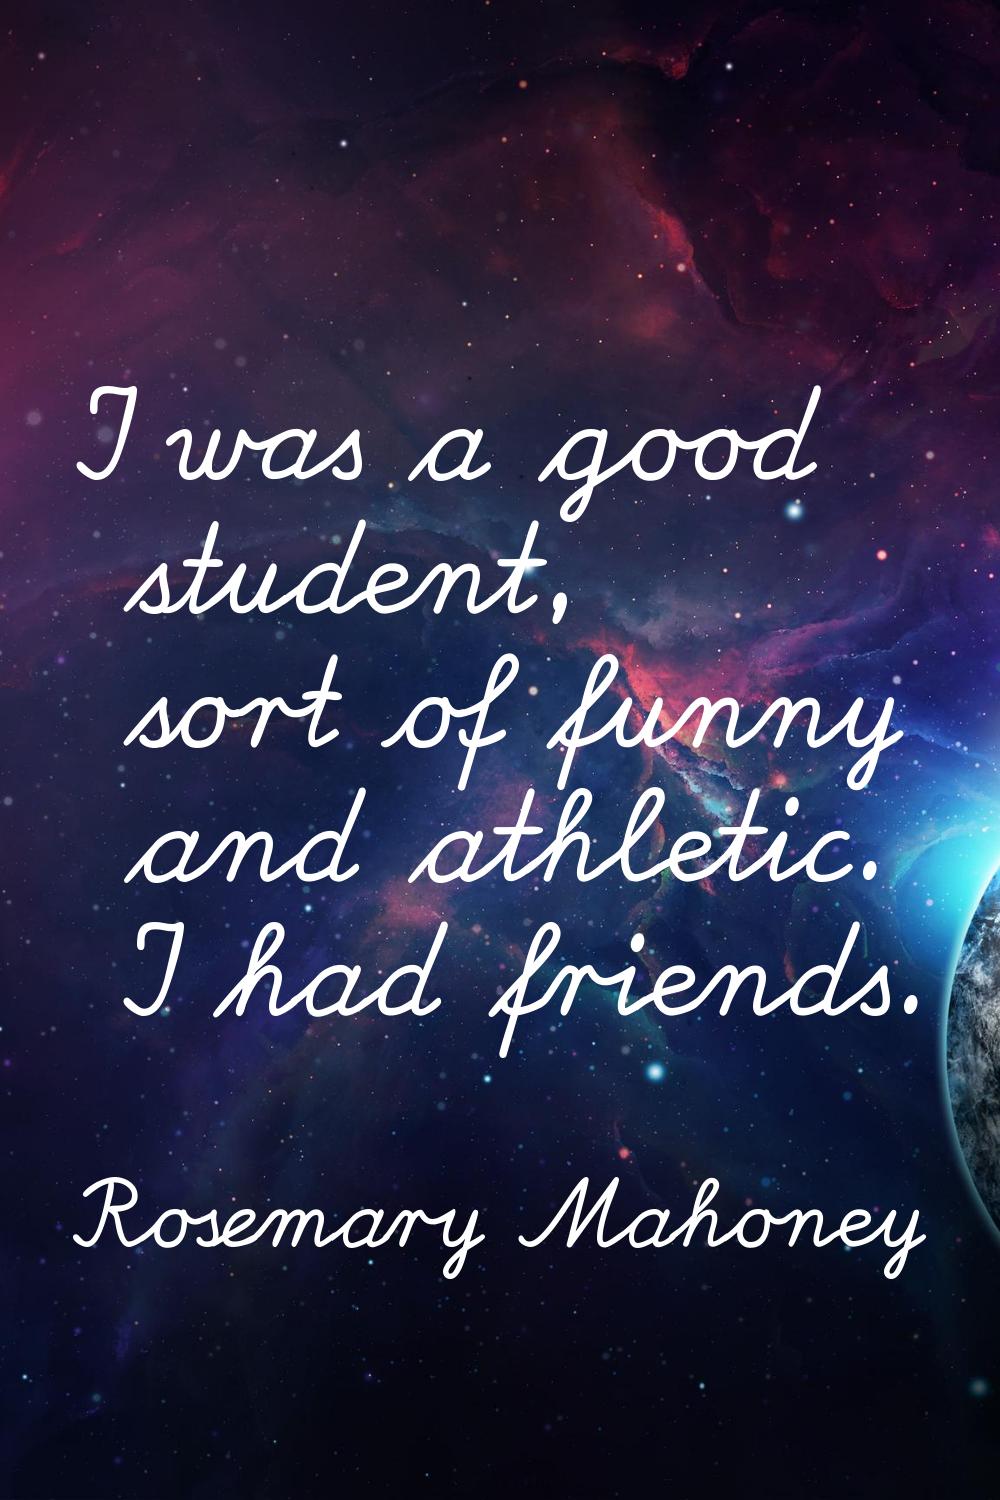 I was a good student, sort of funny and athletic. I had friends.